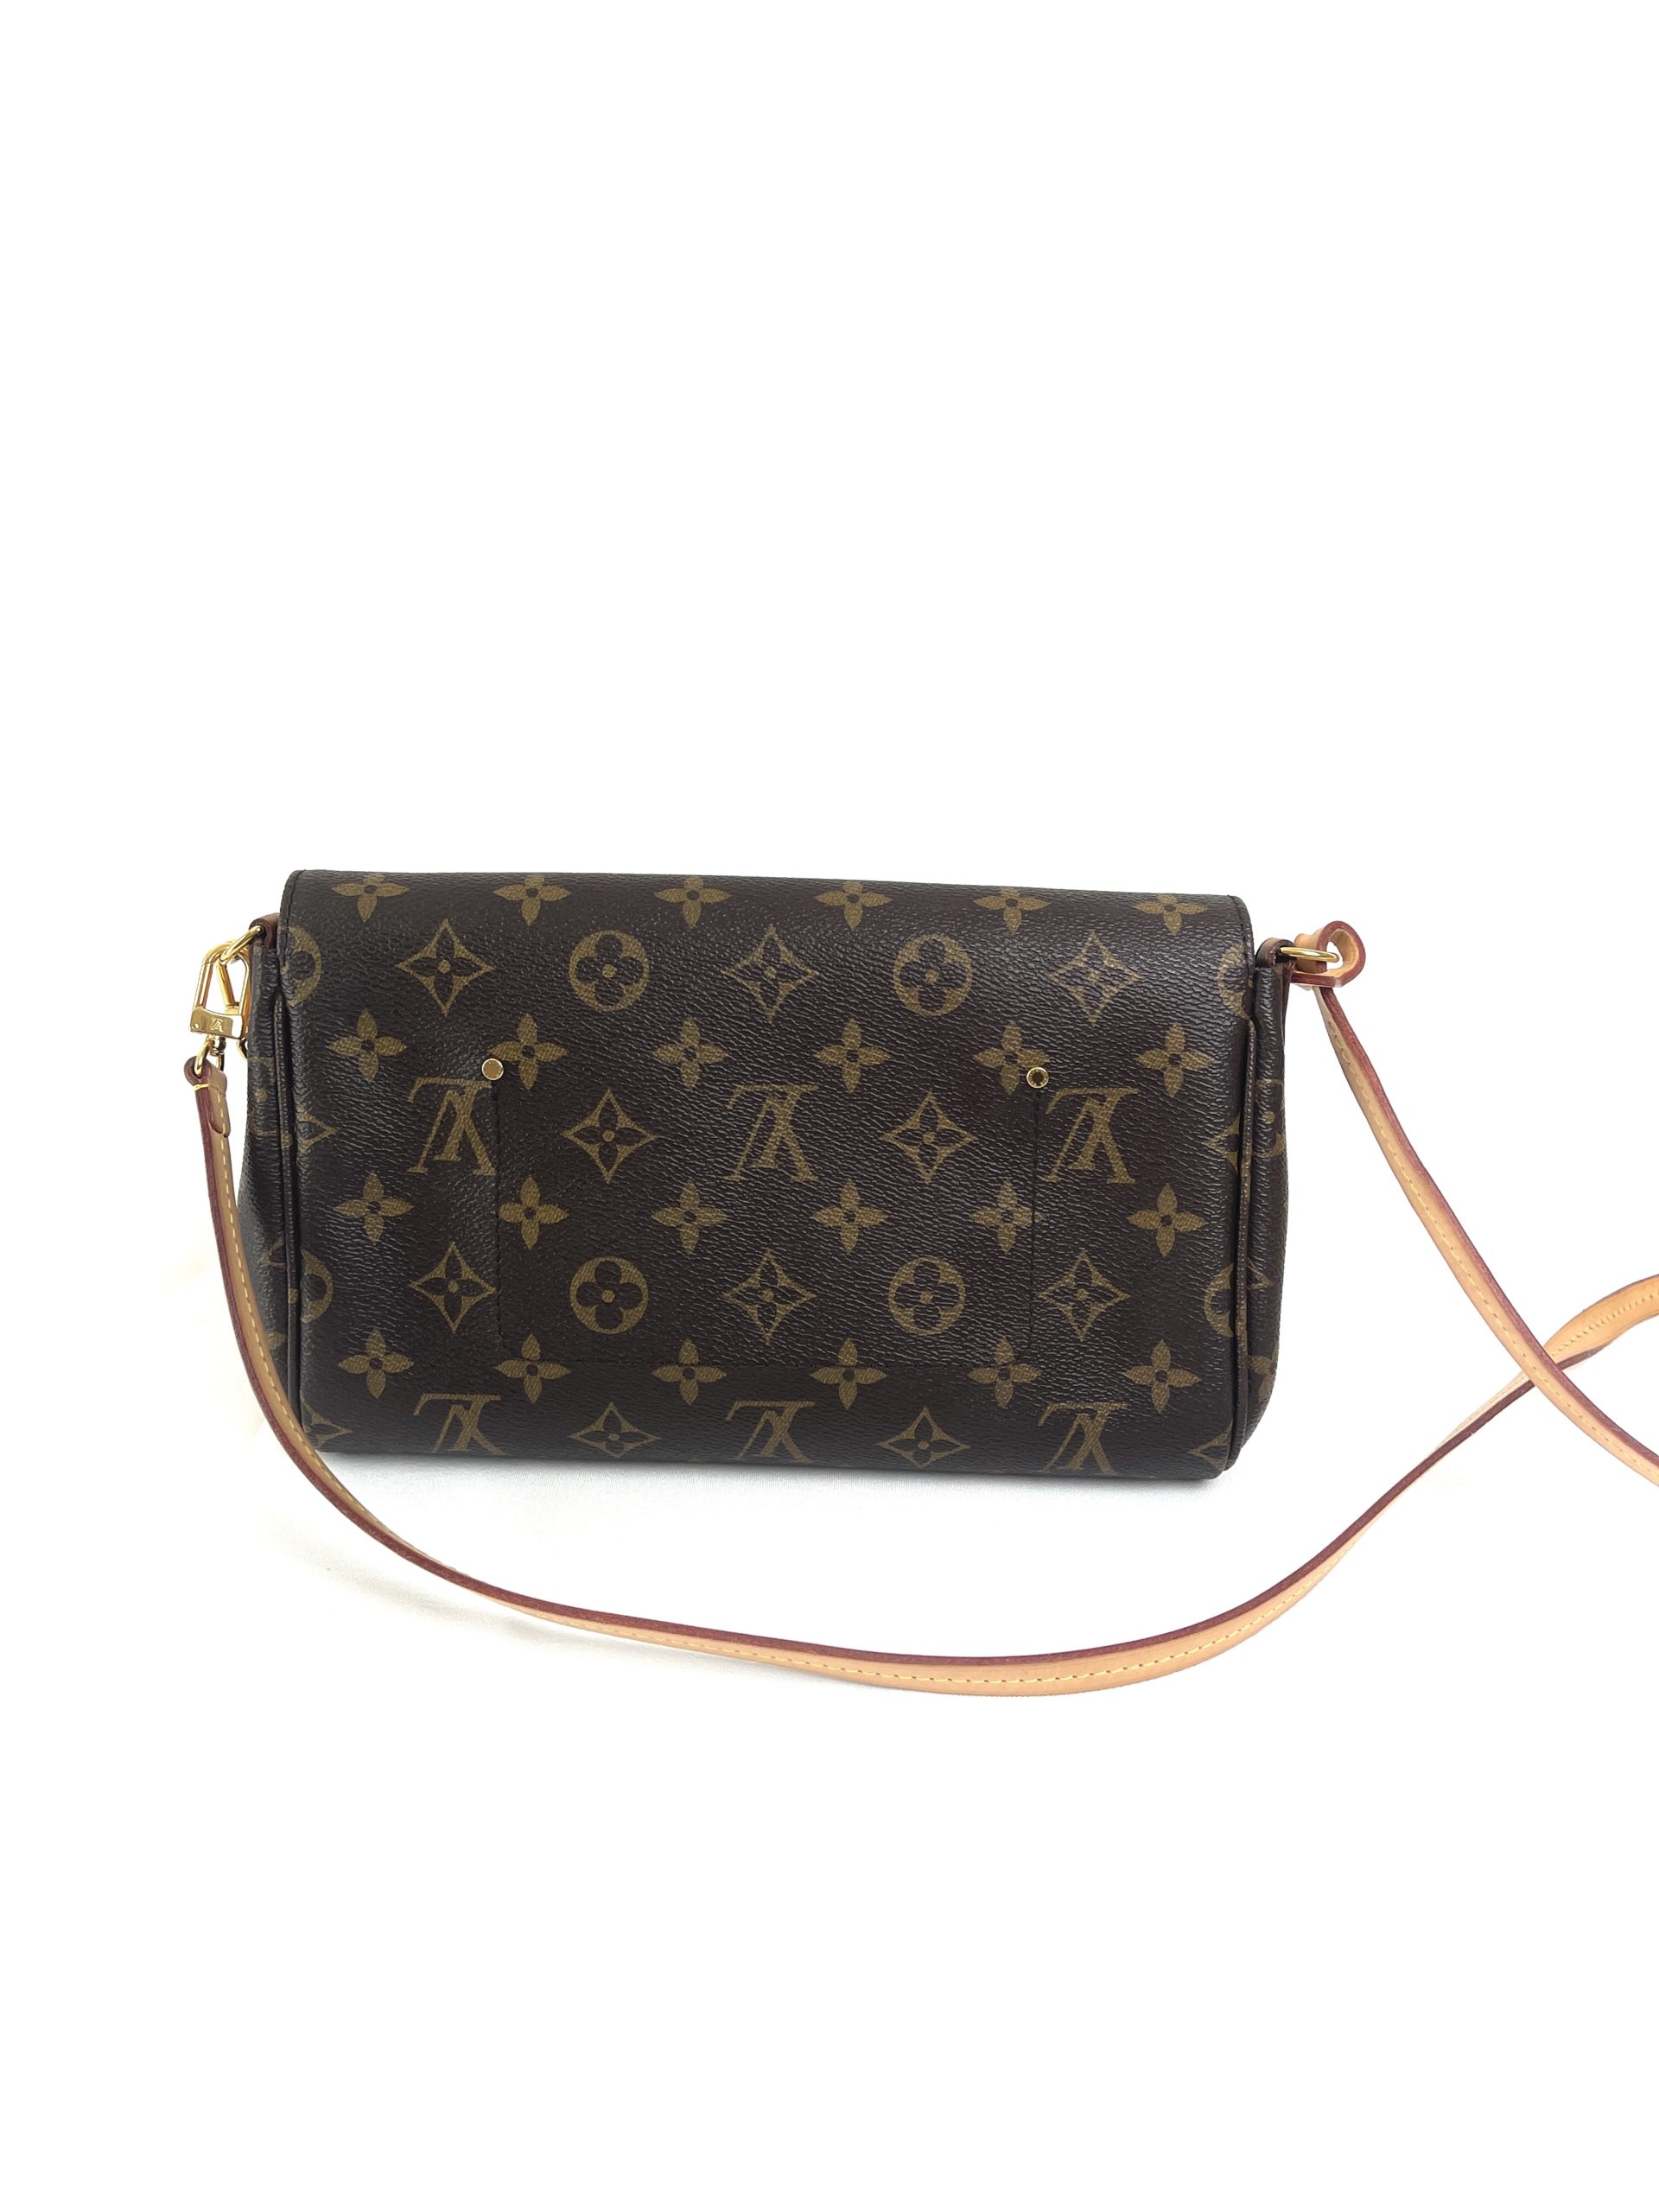 Louis Vuitton Favorite MM Review - Curls and Contours  Louis vuitton bag, Louis  vuitton purse, Louis vuitton favorite mm